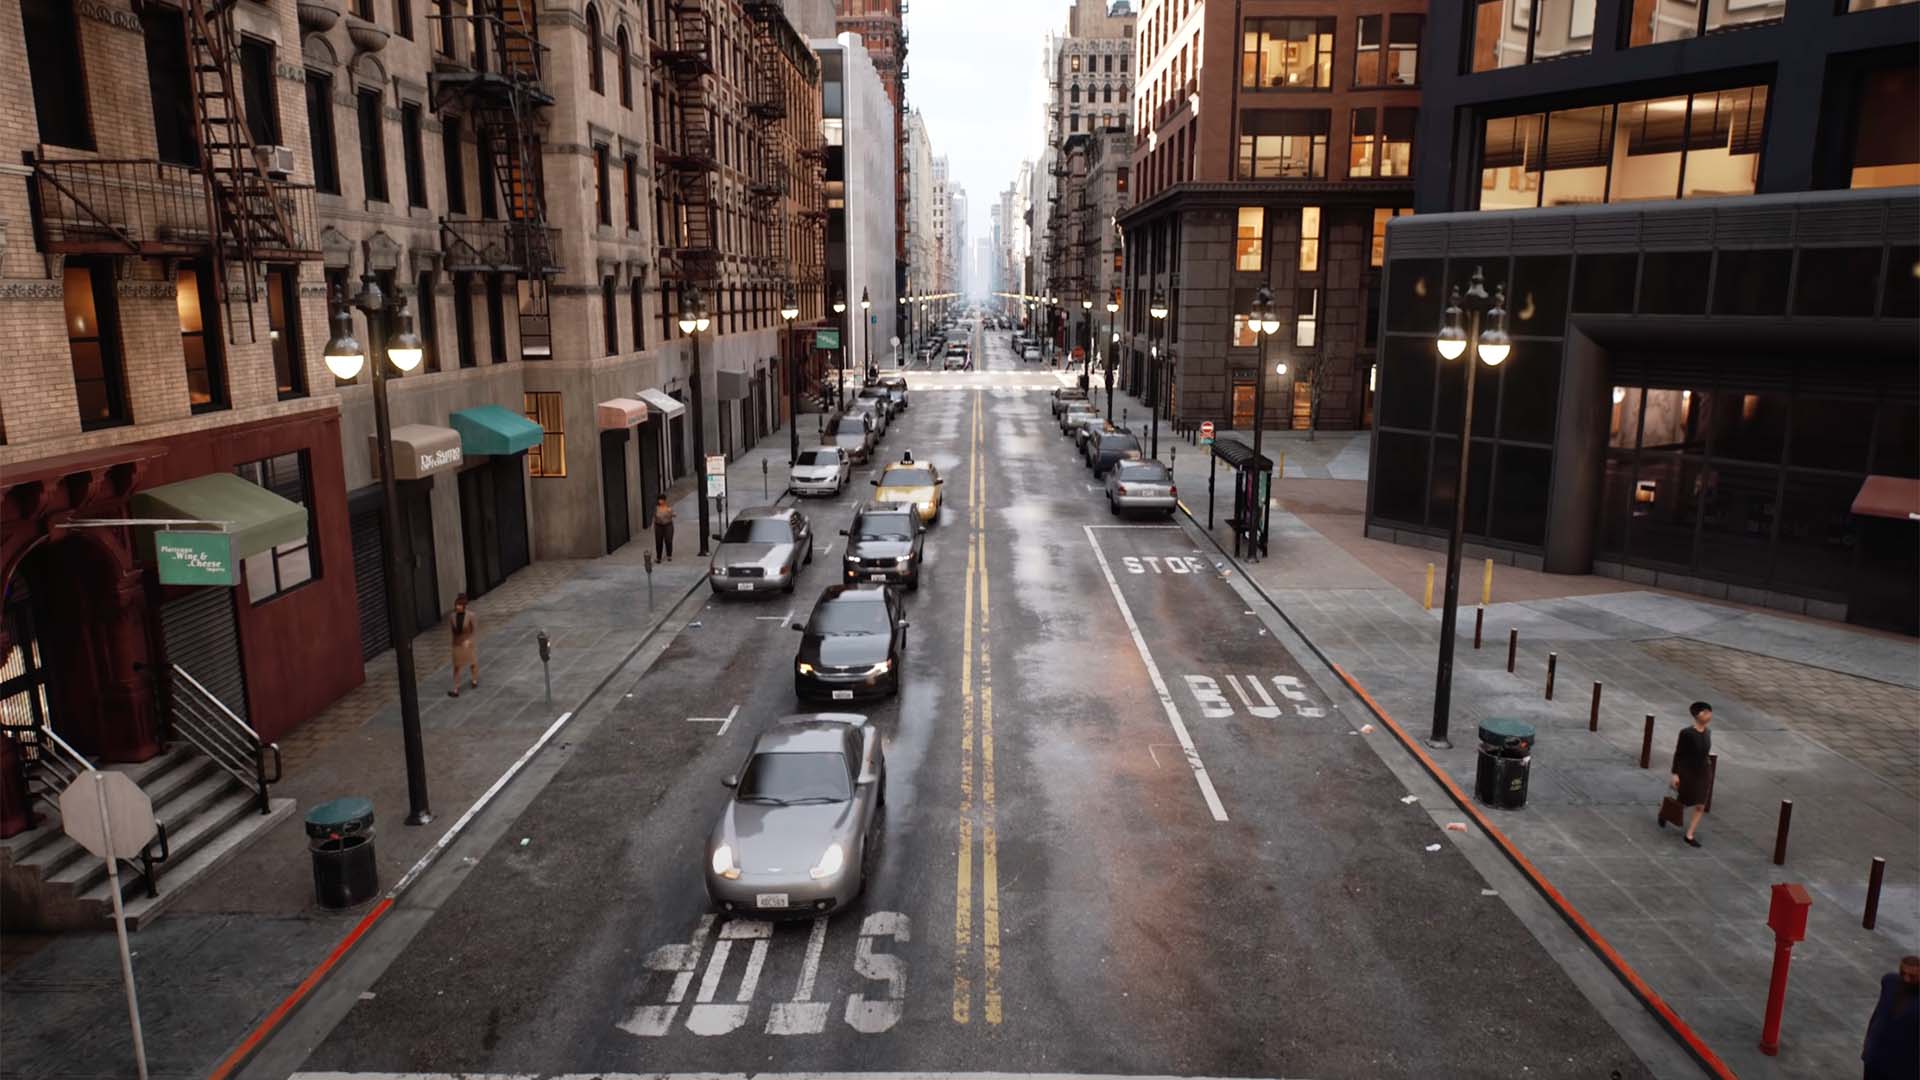 Advancements like Unreal Engine 5 could mean were at a tipping